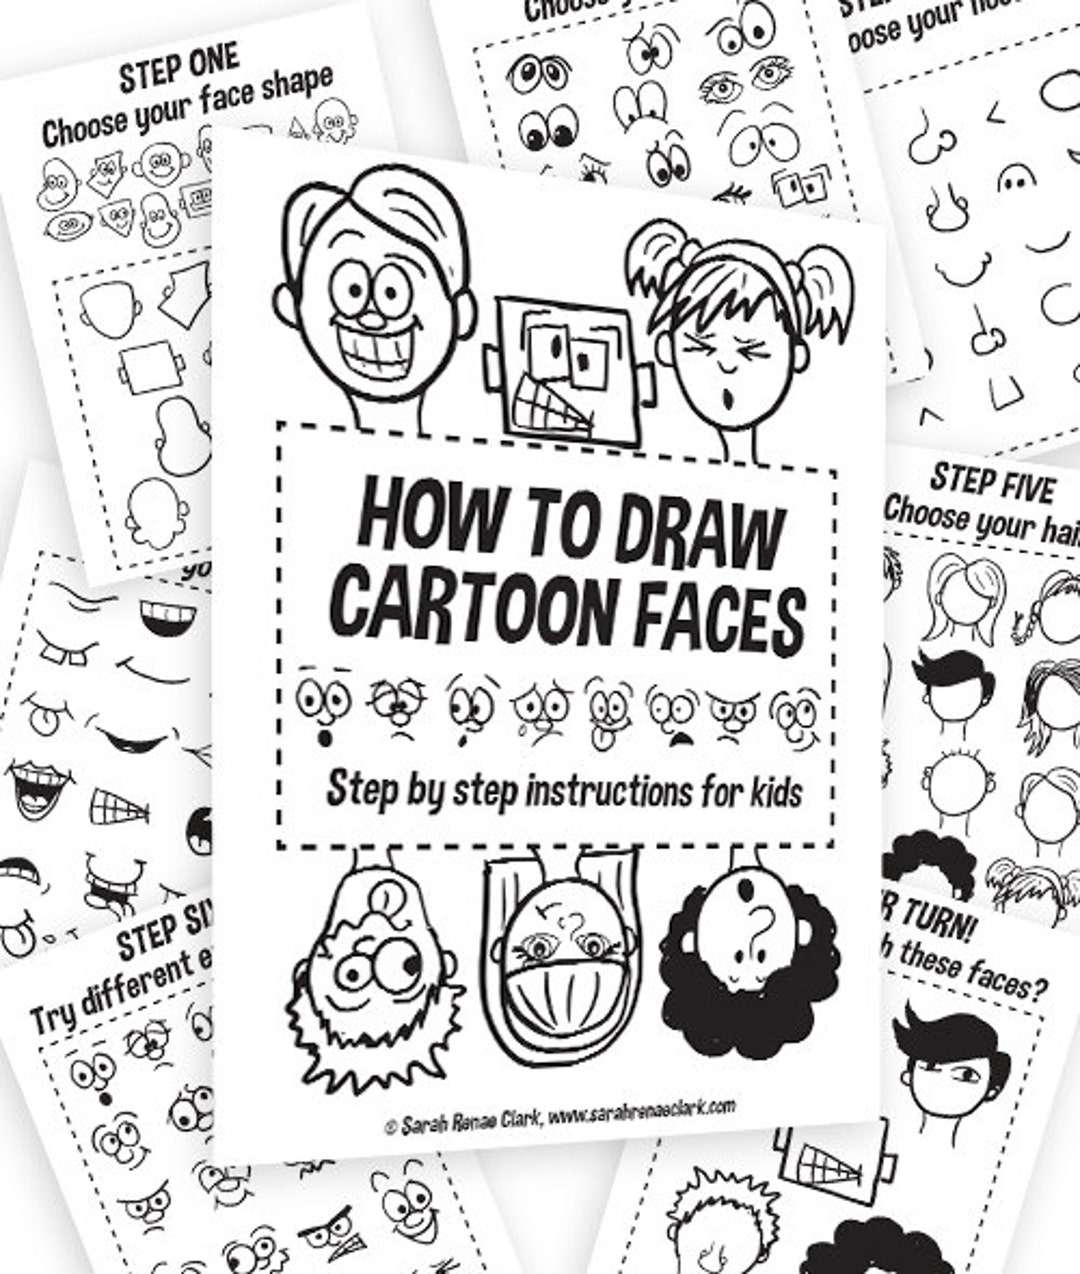 Sketch Book For Kids: Practice How To Draw Workbook, 8.5 x 11